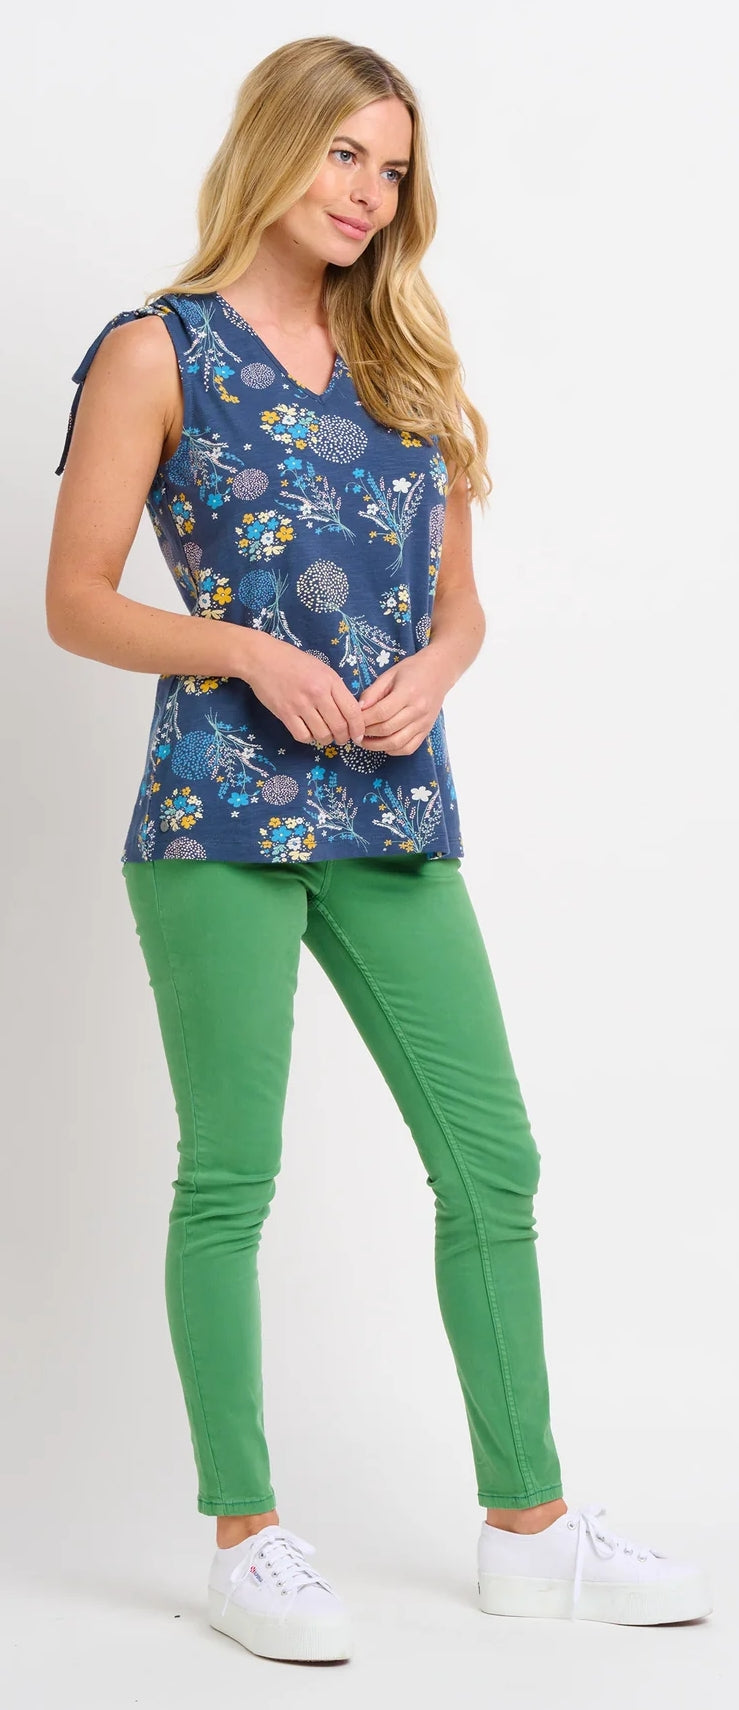 Bursting Blooms women's vest in navy with a floral print from Brakeburn